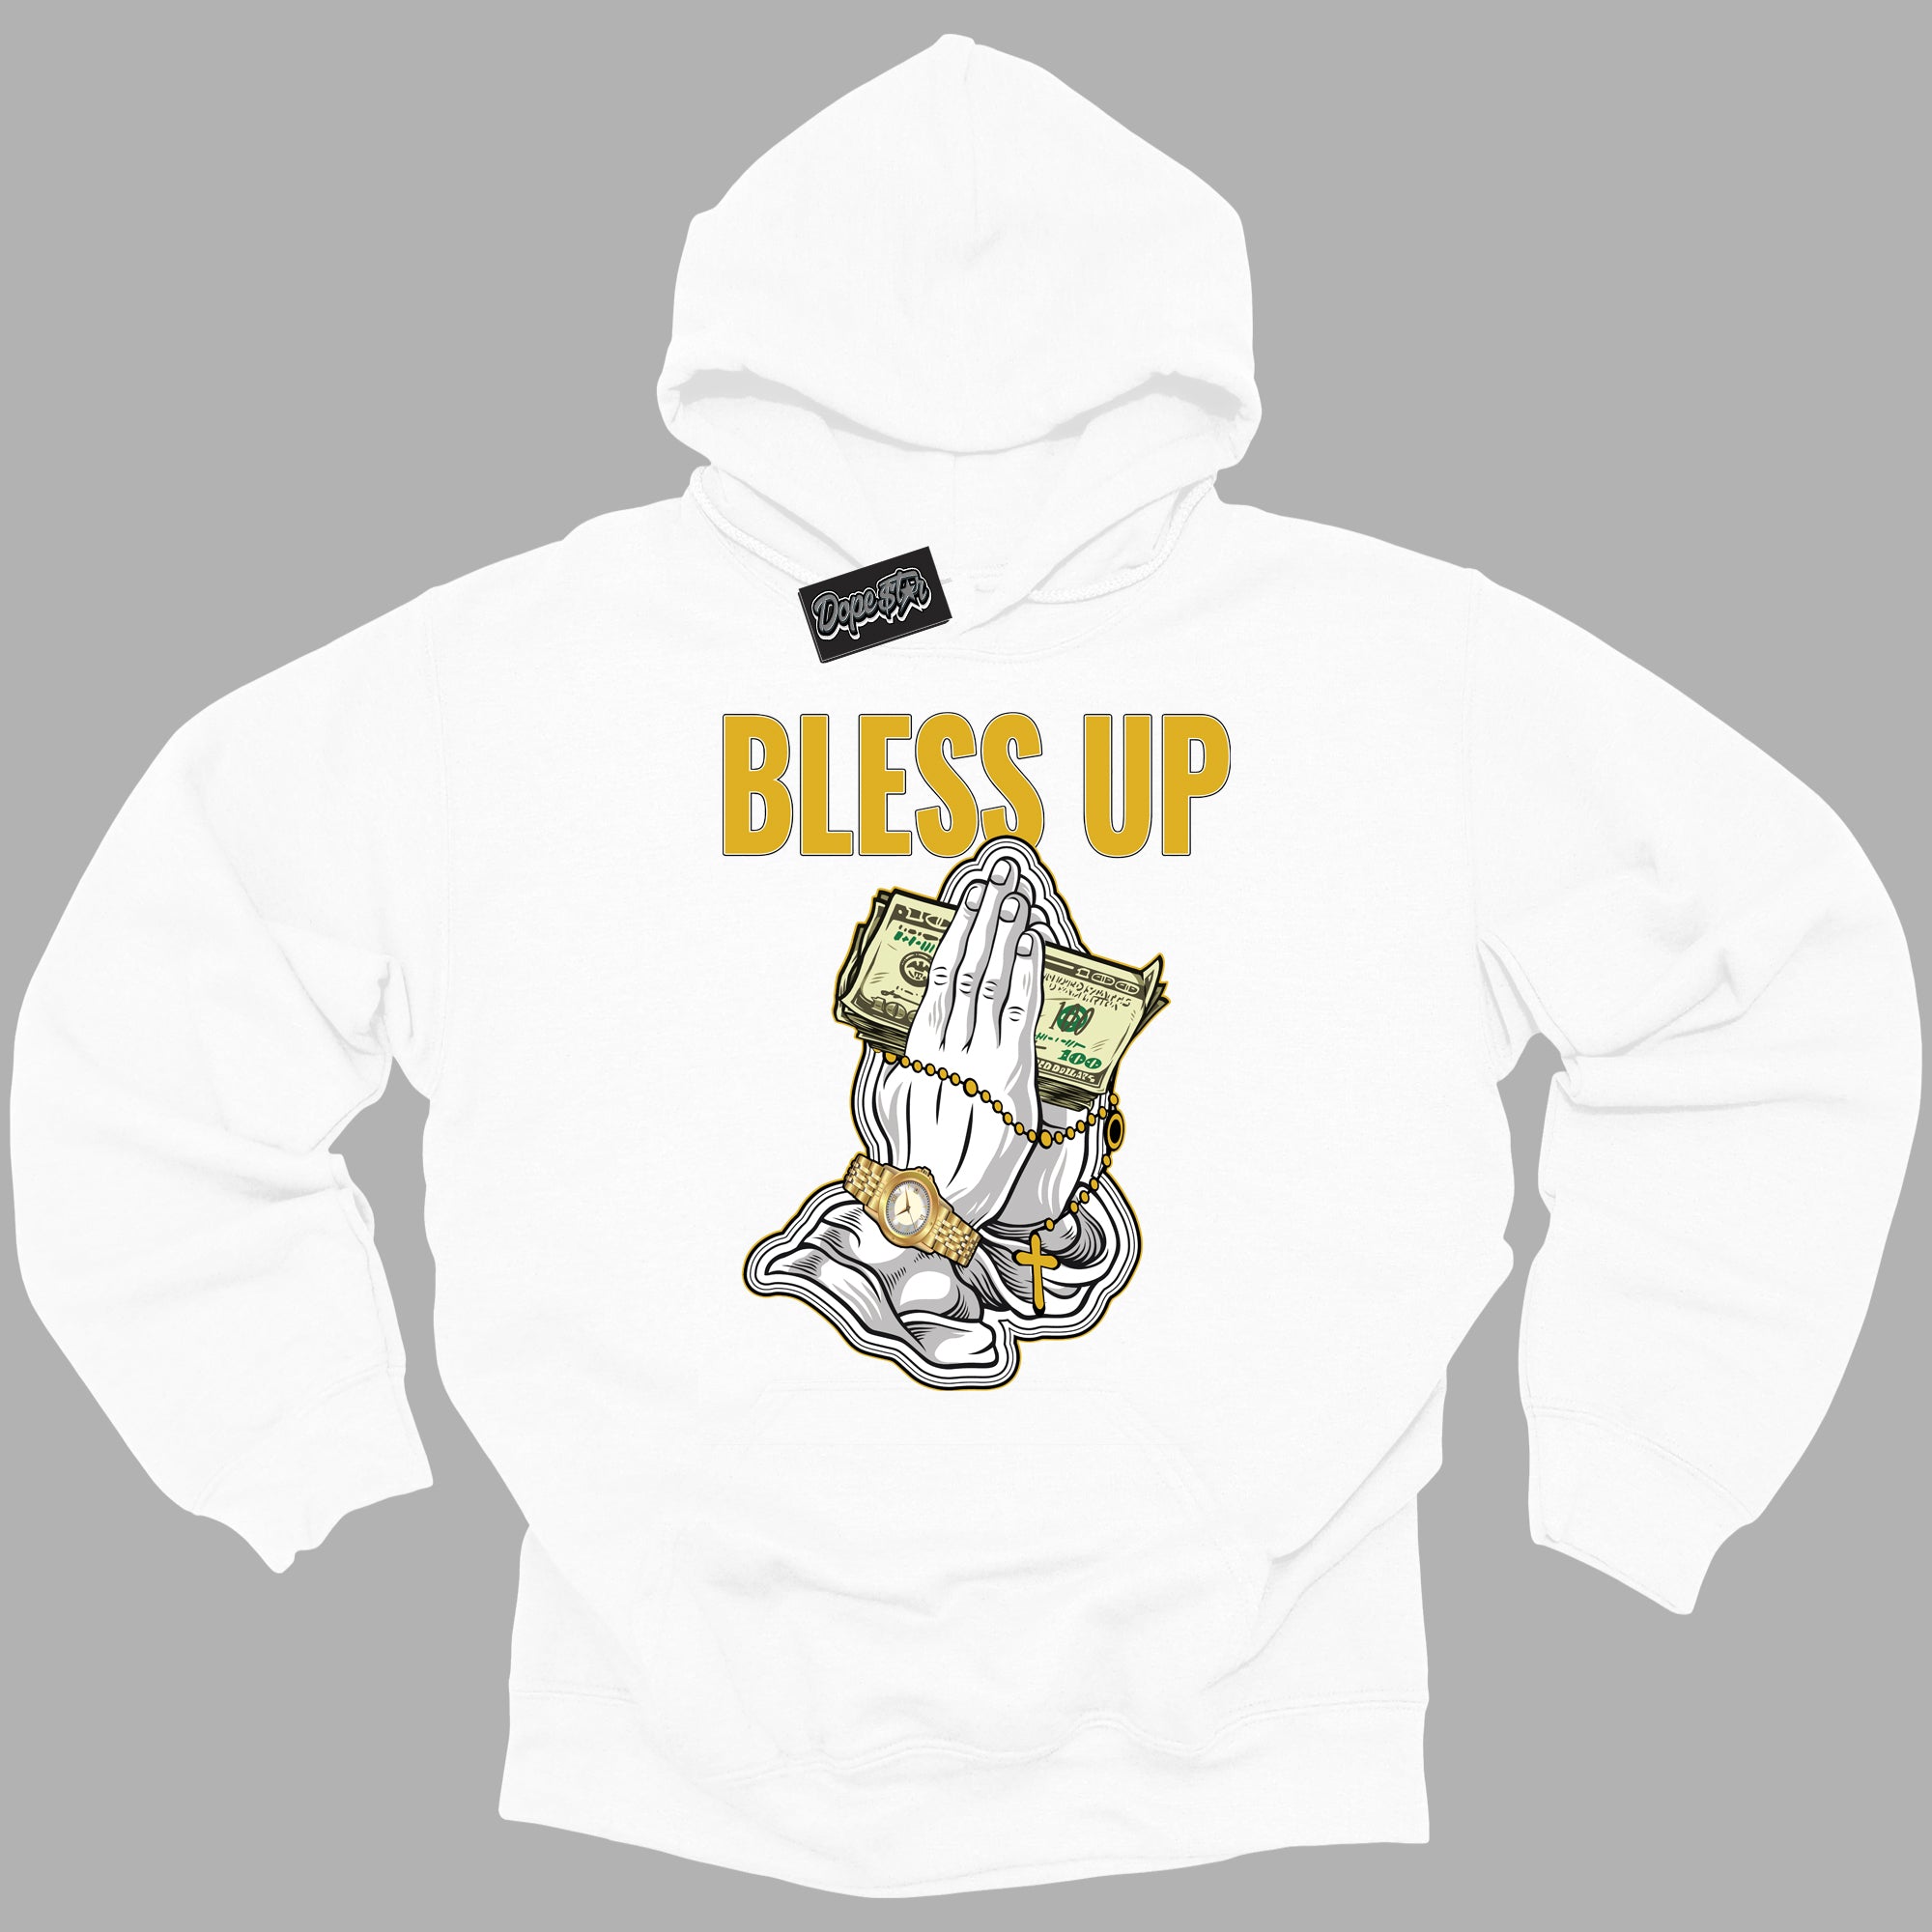 Cool White Hoodie with “ Bless Up ”  design that Perfectly Matches Yellow Ochre 6s Sneakers.